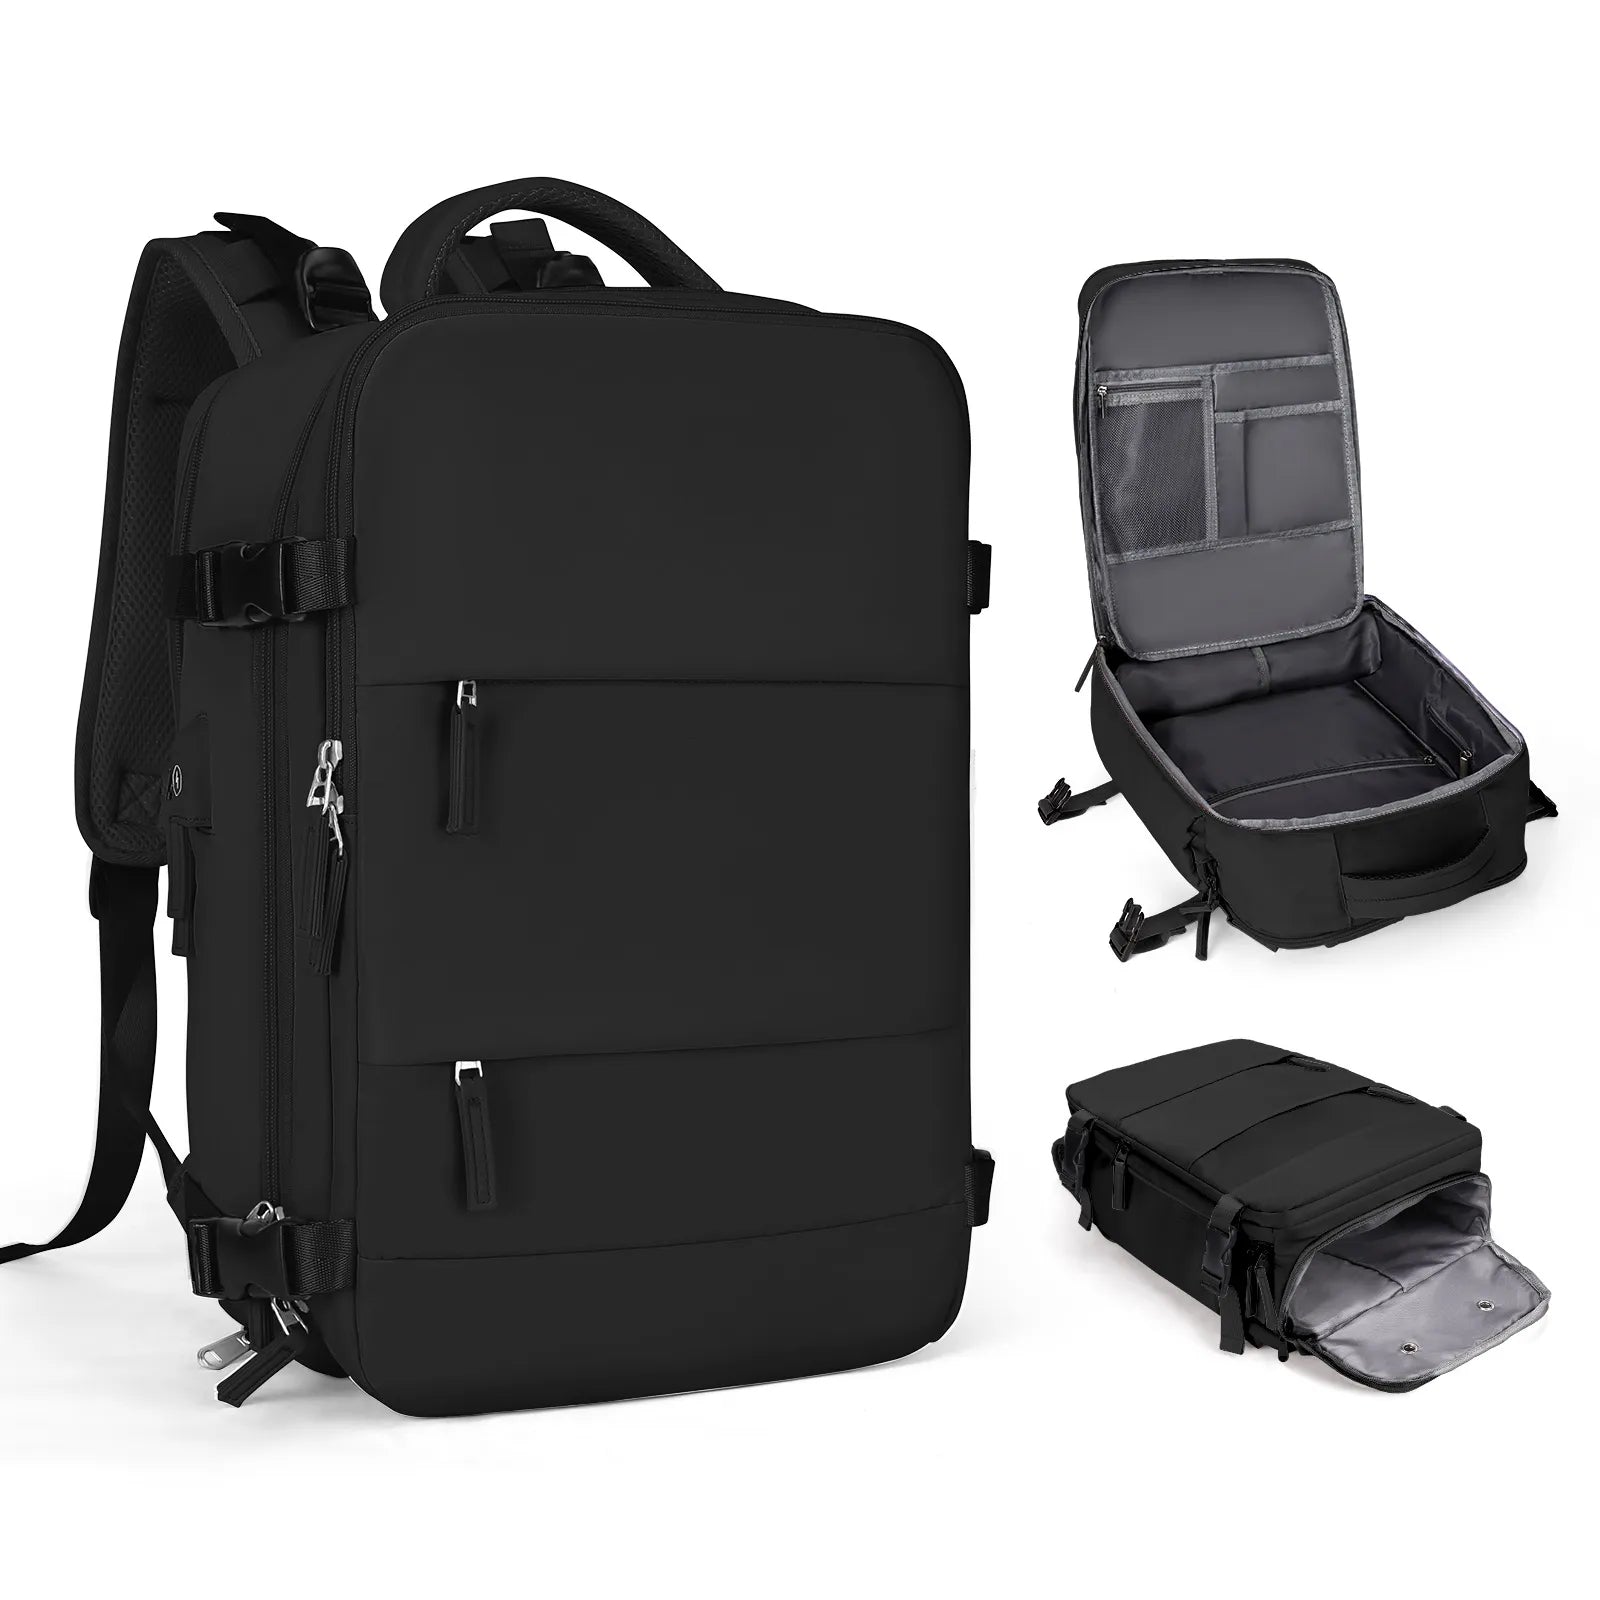 Black travel backpack personal item with wet dry pocket laptop sleeve usb charger and shoe sleeve